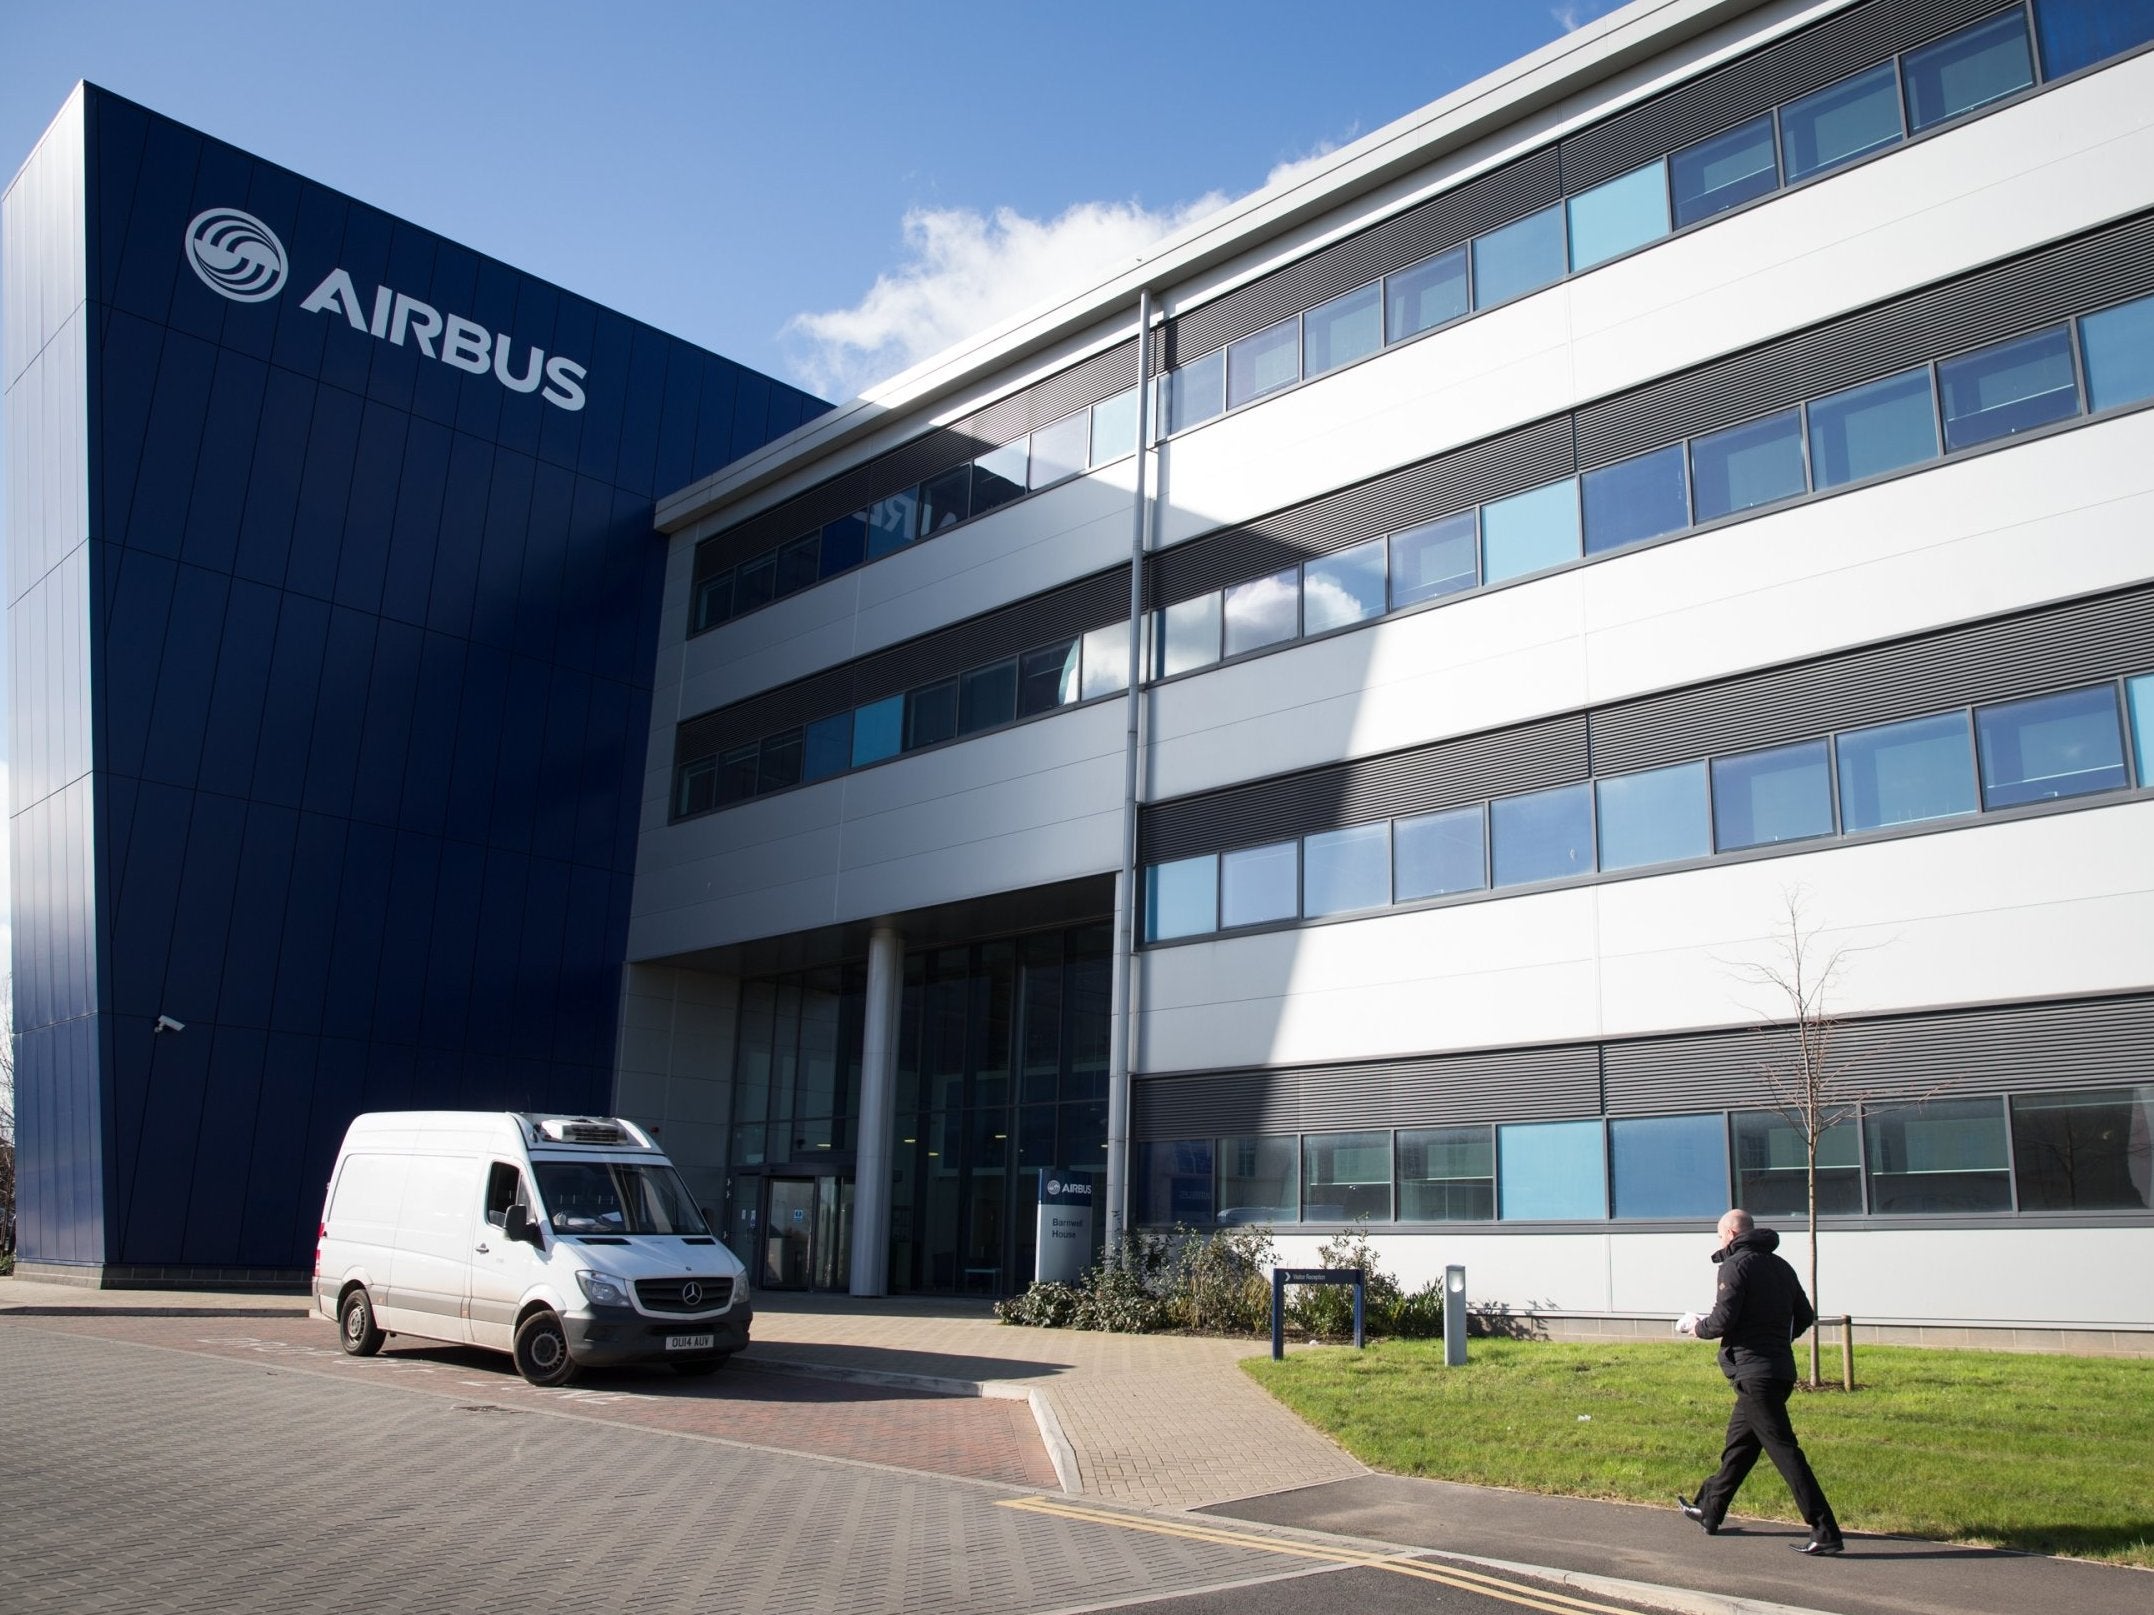 Sony and Airbus illustrate the huge uncertainty of Brexit’s impact on UK jobs and investment